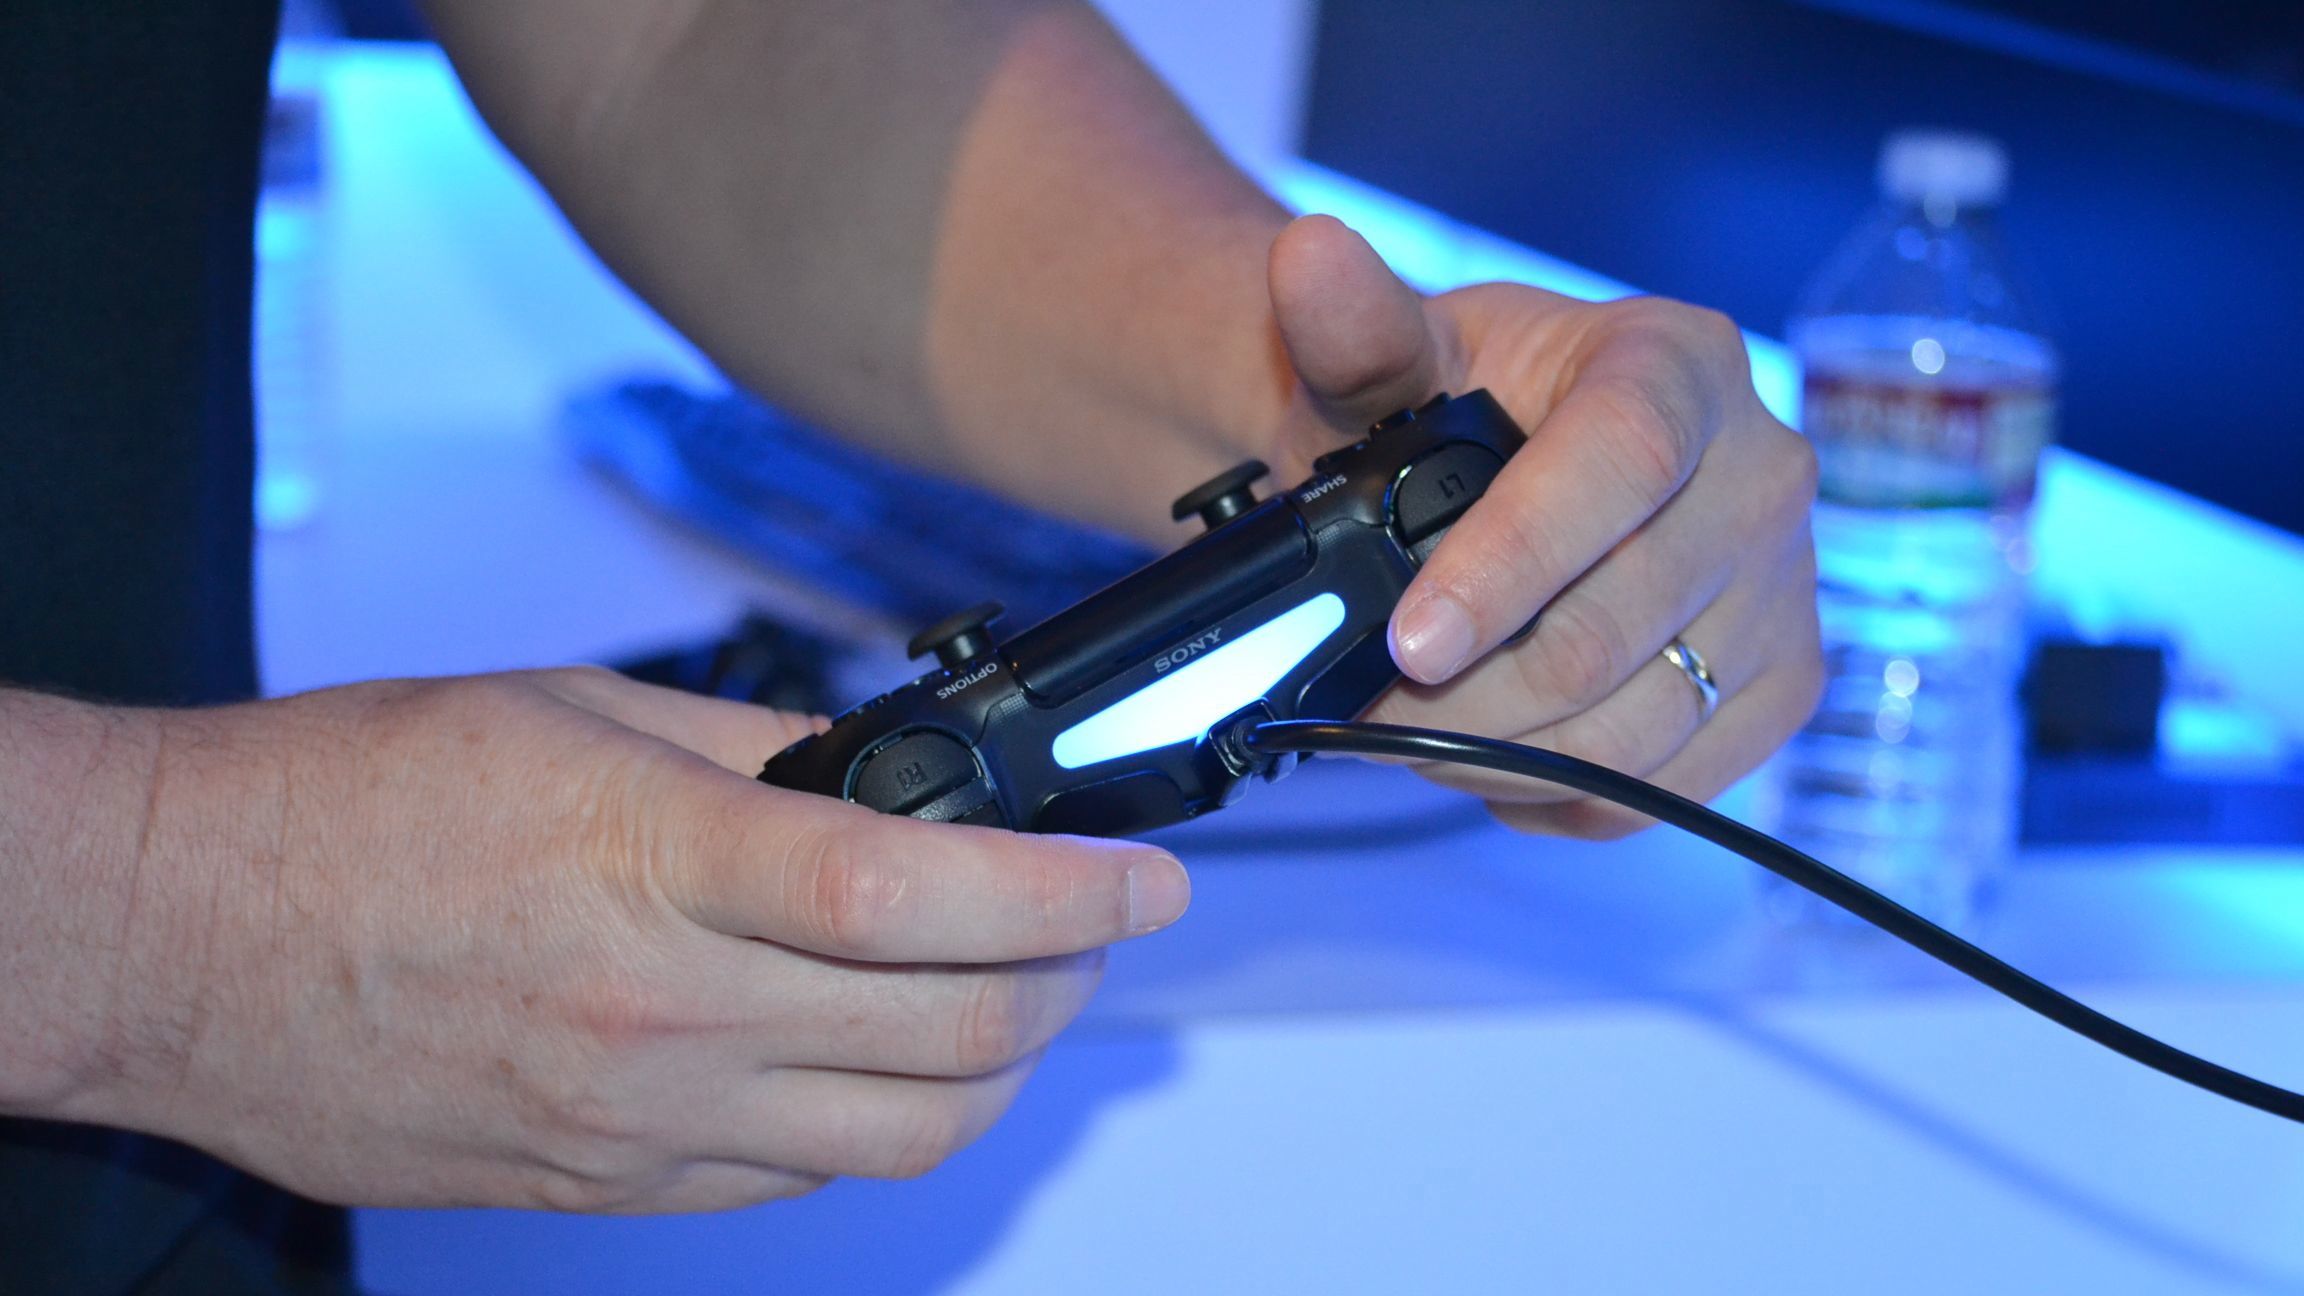 The back of the DualShock 4 is lit up